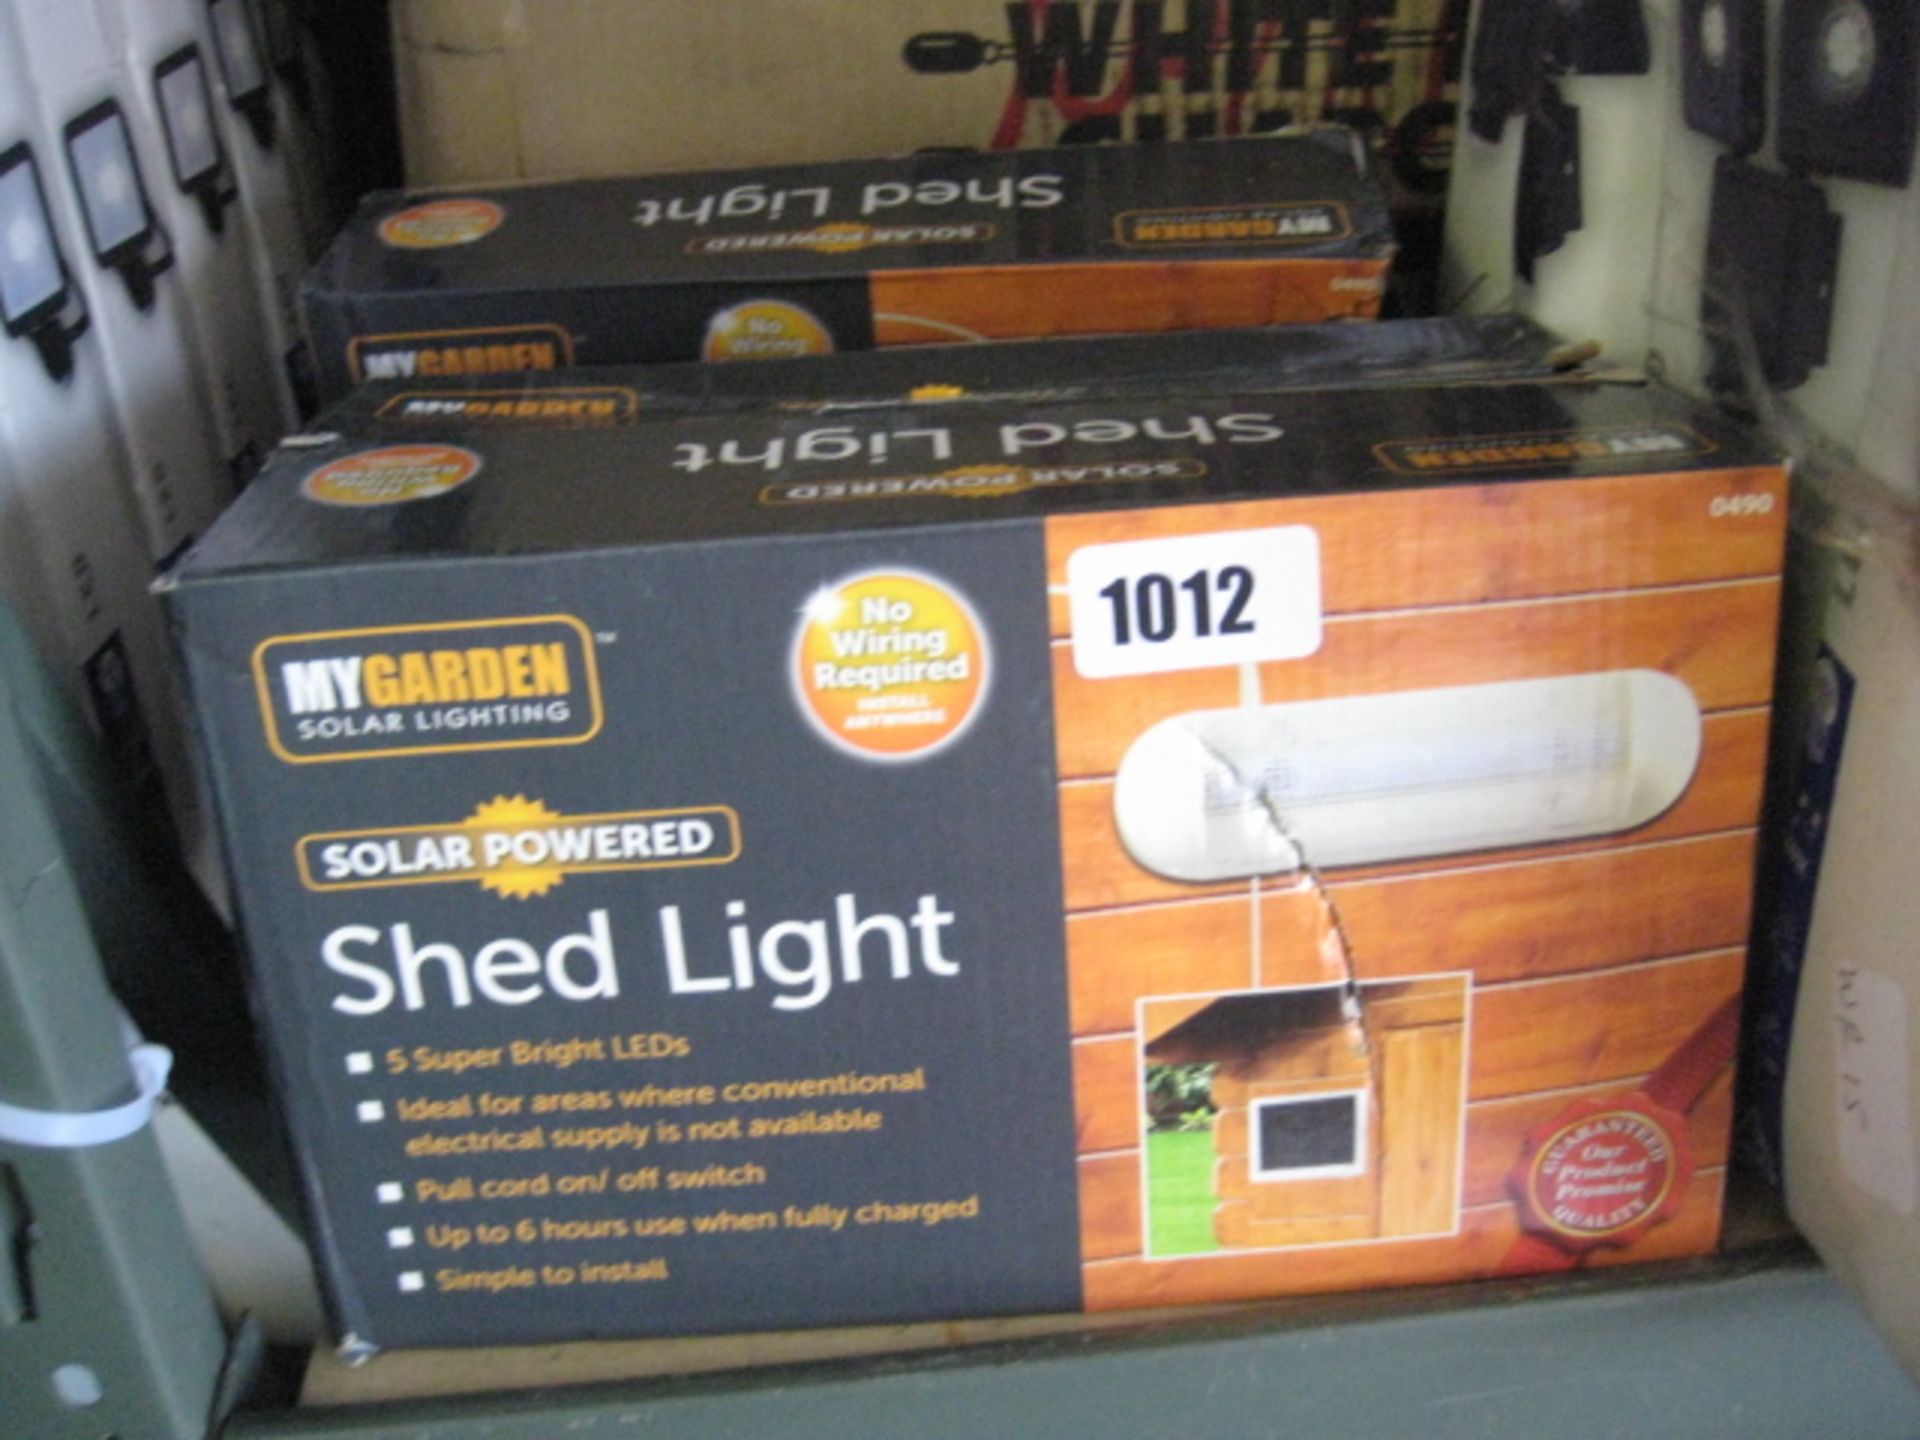 4 boxed LED wall lights with 3 packs of solar powered shed lights